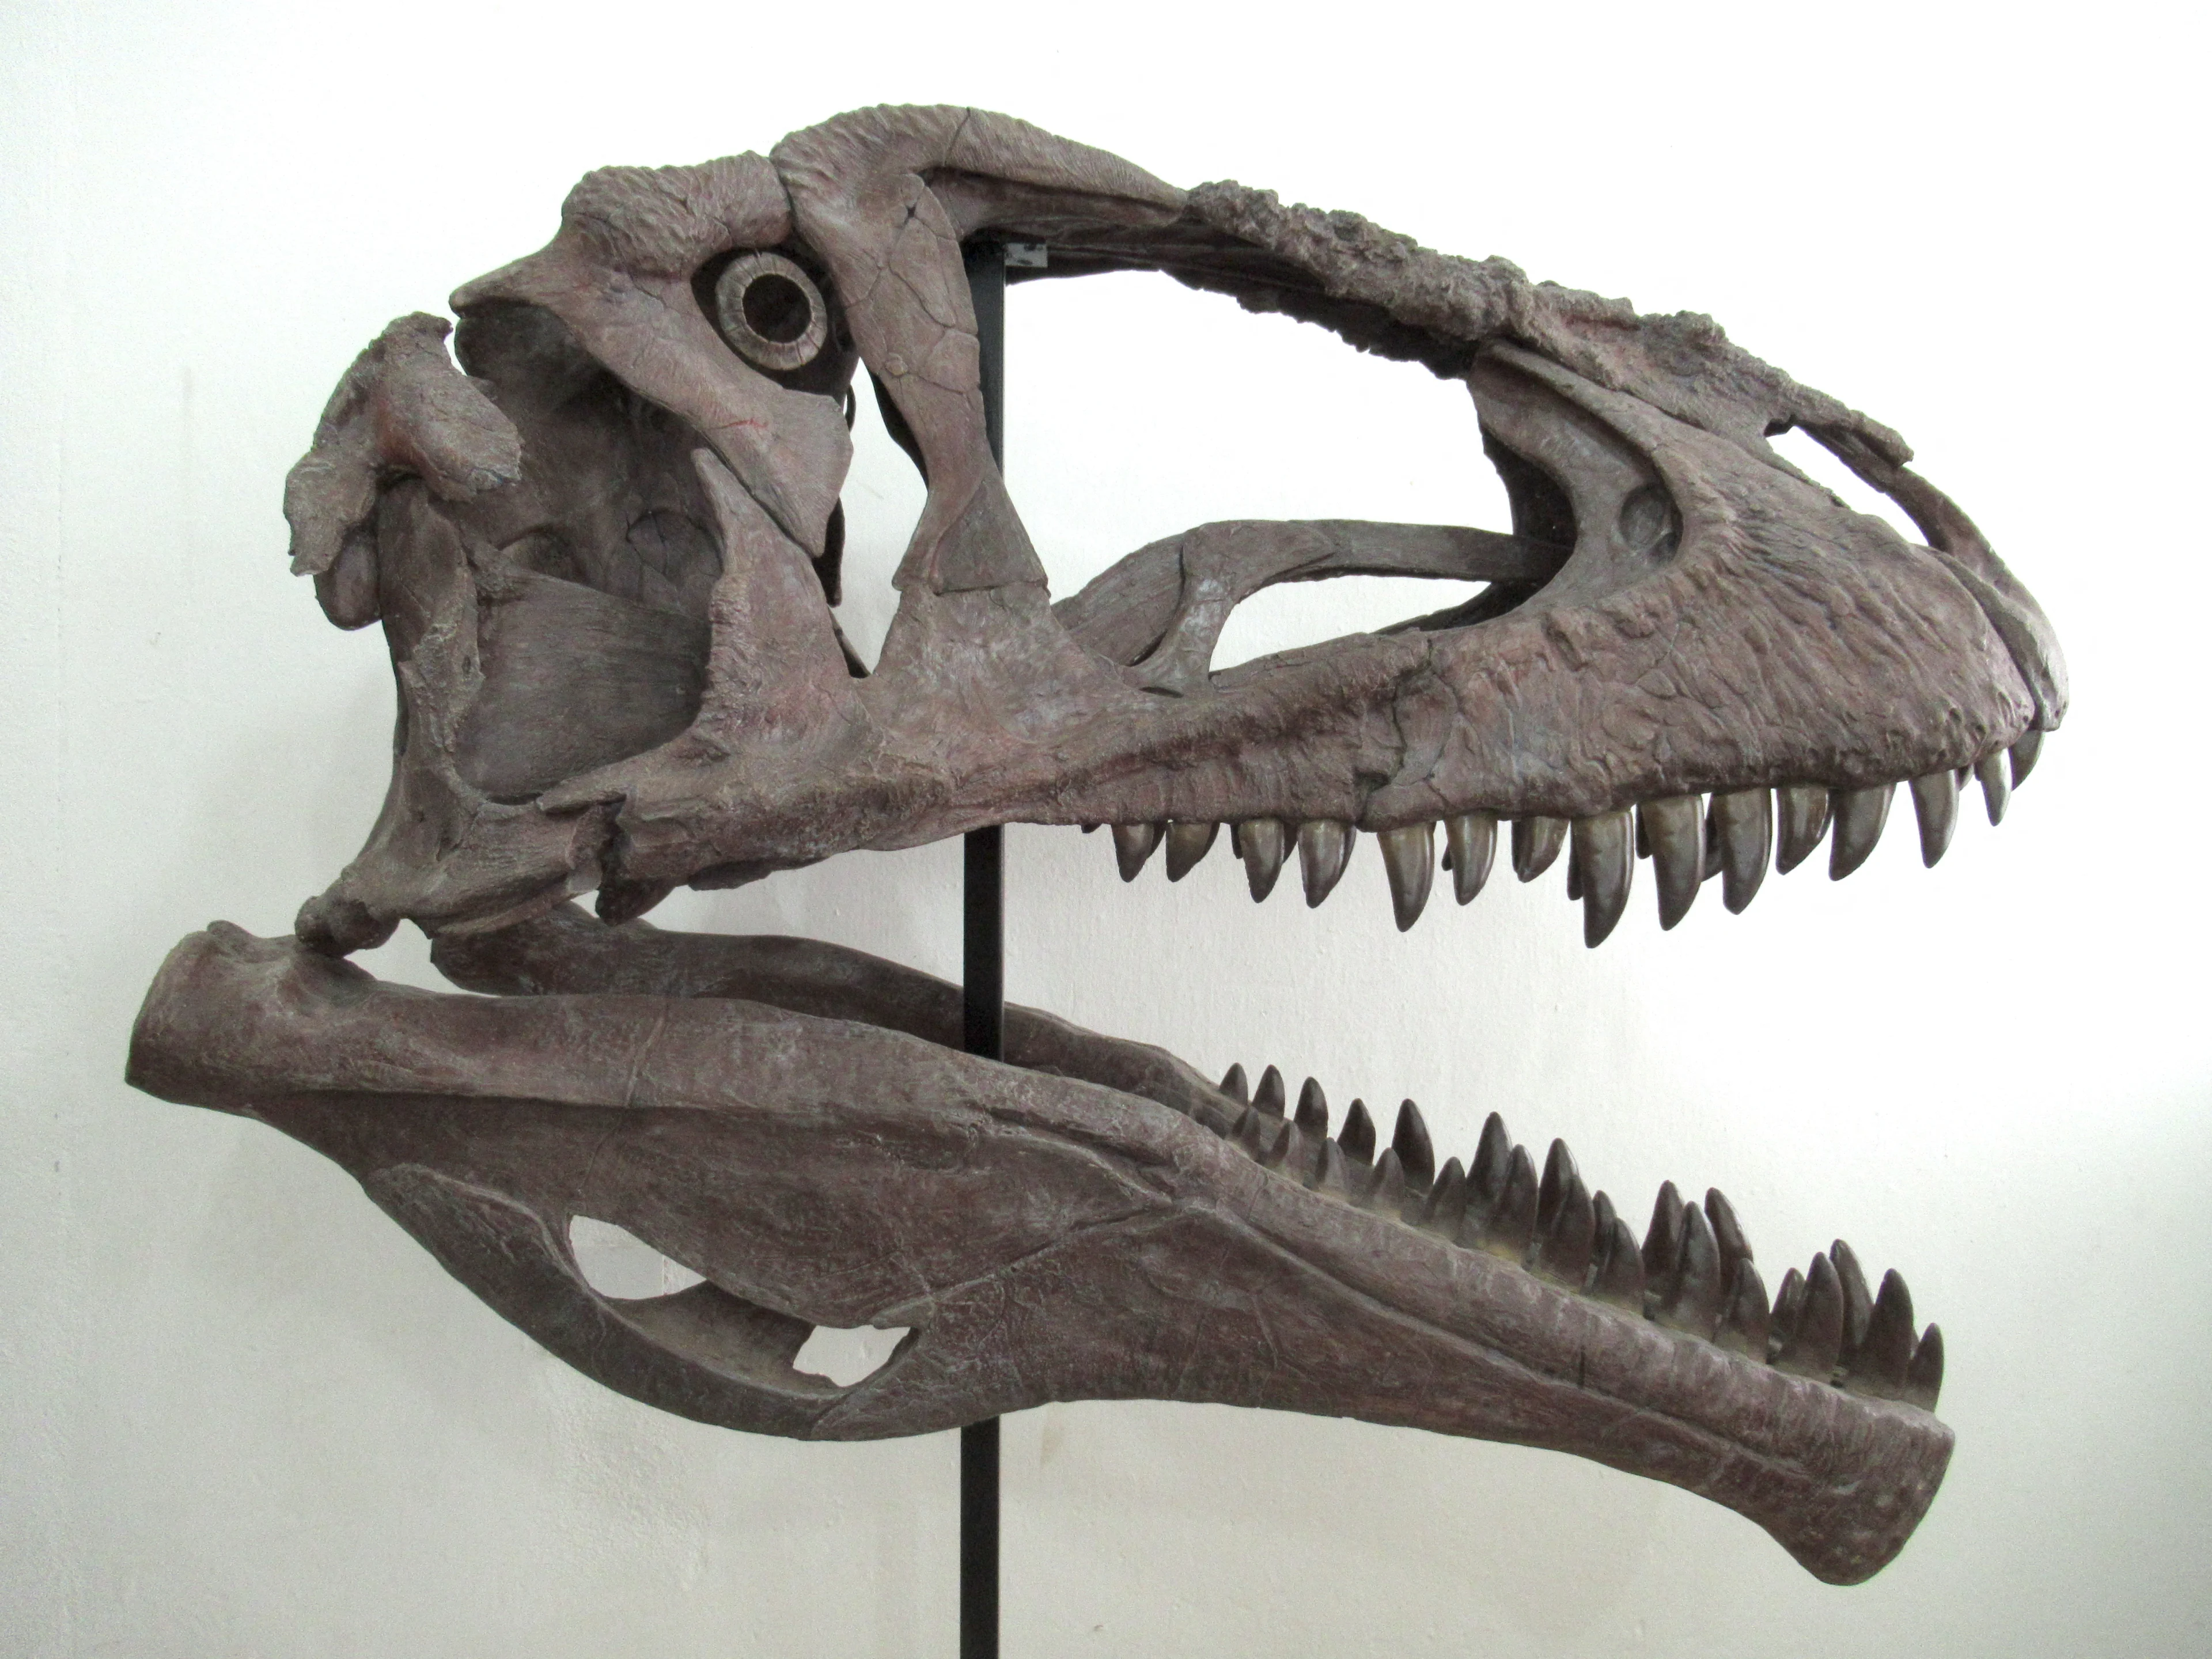 A reconstruction of the skull of Cretaceous Period meat-eating dinosaur Meraxes gigas, whose fossils including a nearly complete skull were unearthed in Argentina’s northern Patagonia region, seen in an undated handout photo. Meraxes, which lived about 90 million years ago, is estimated at about 36-39 feet (11-12 meters) long and about 9,000 pounds (4 metric tons). Javier Pazo and Lautaro Rodriguez Blanco/Handout via REUTERS.